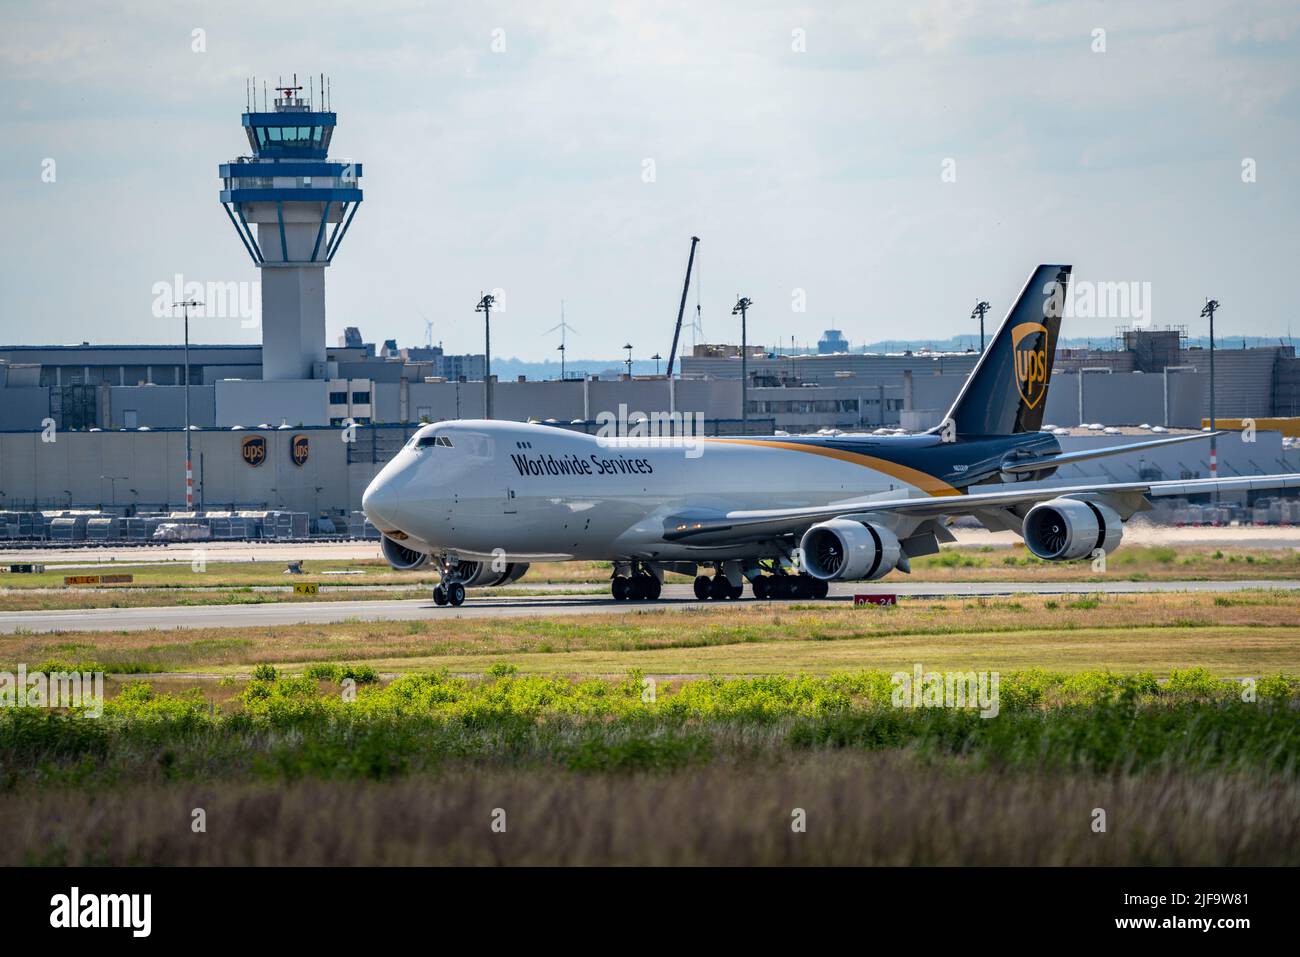 Cologne-Bonn Airport, CGN, UPS cargo aircraft, Boeing 747 jumbo jet, on landing, German Air Traffic Control tower, Cologne, NRW, Germany Stock Photo